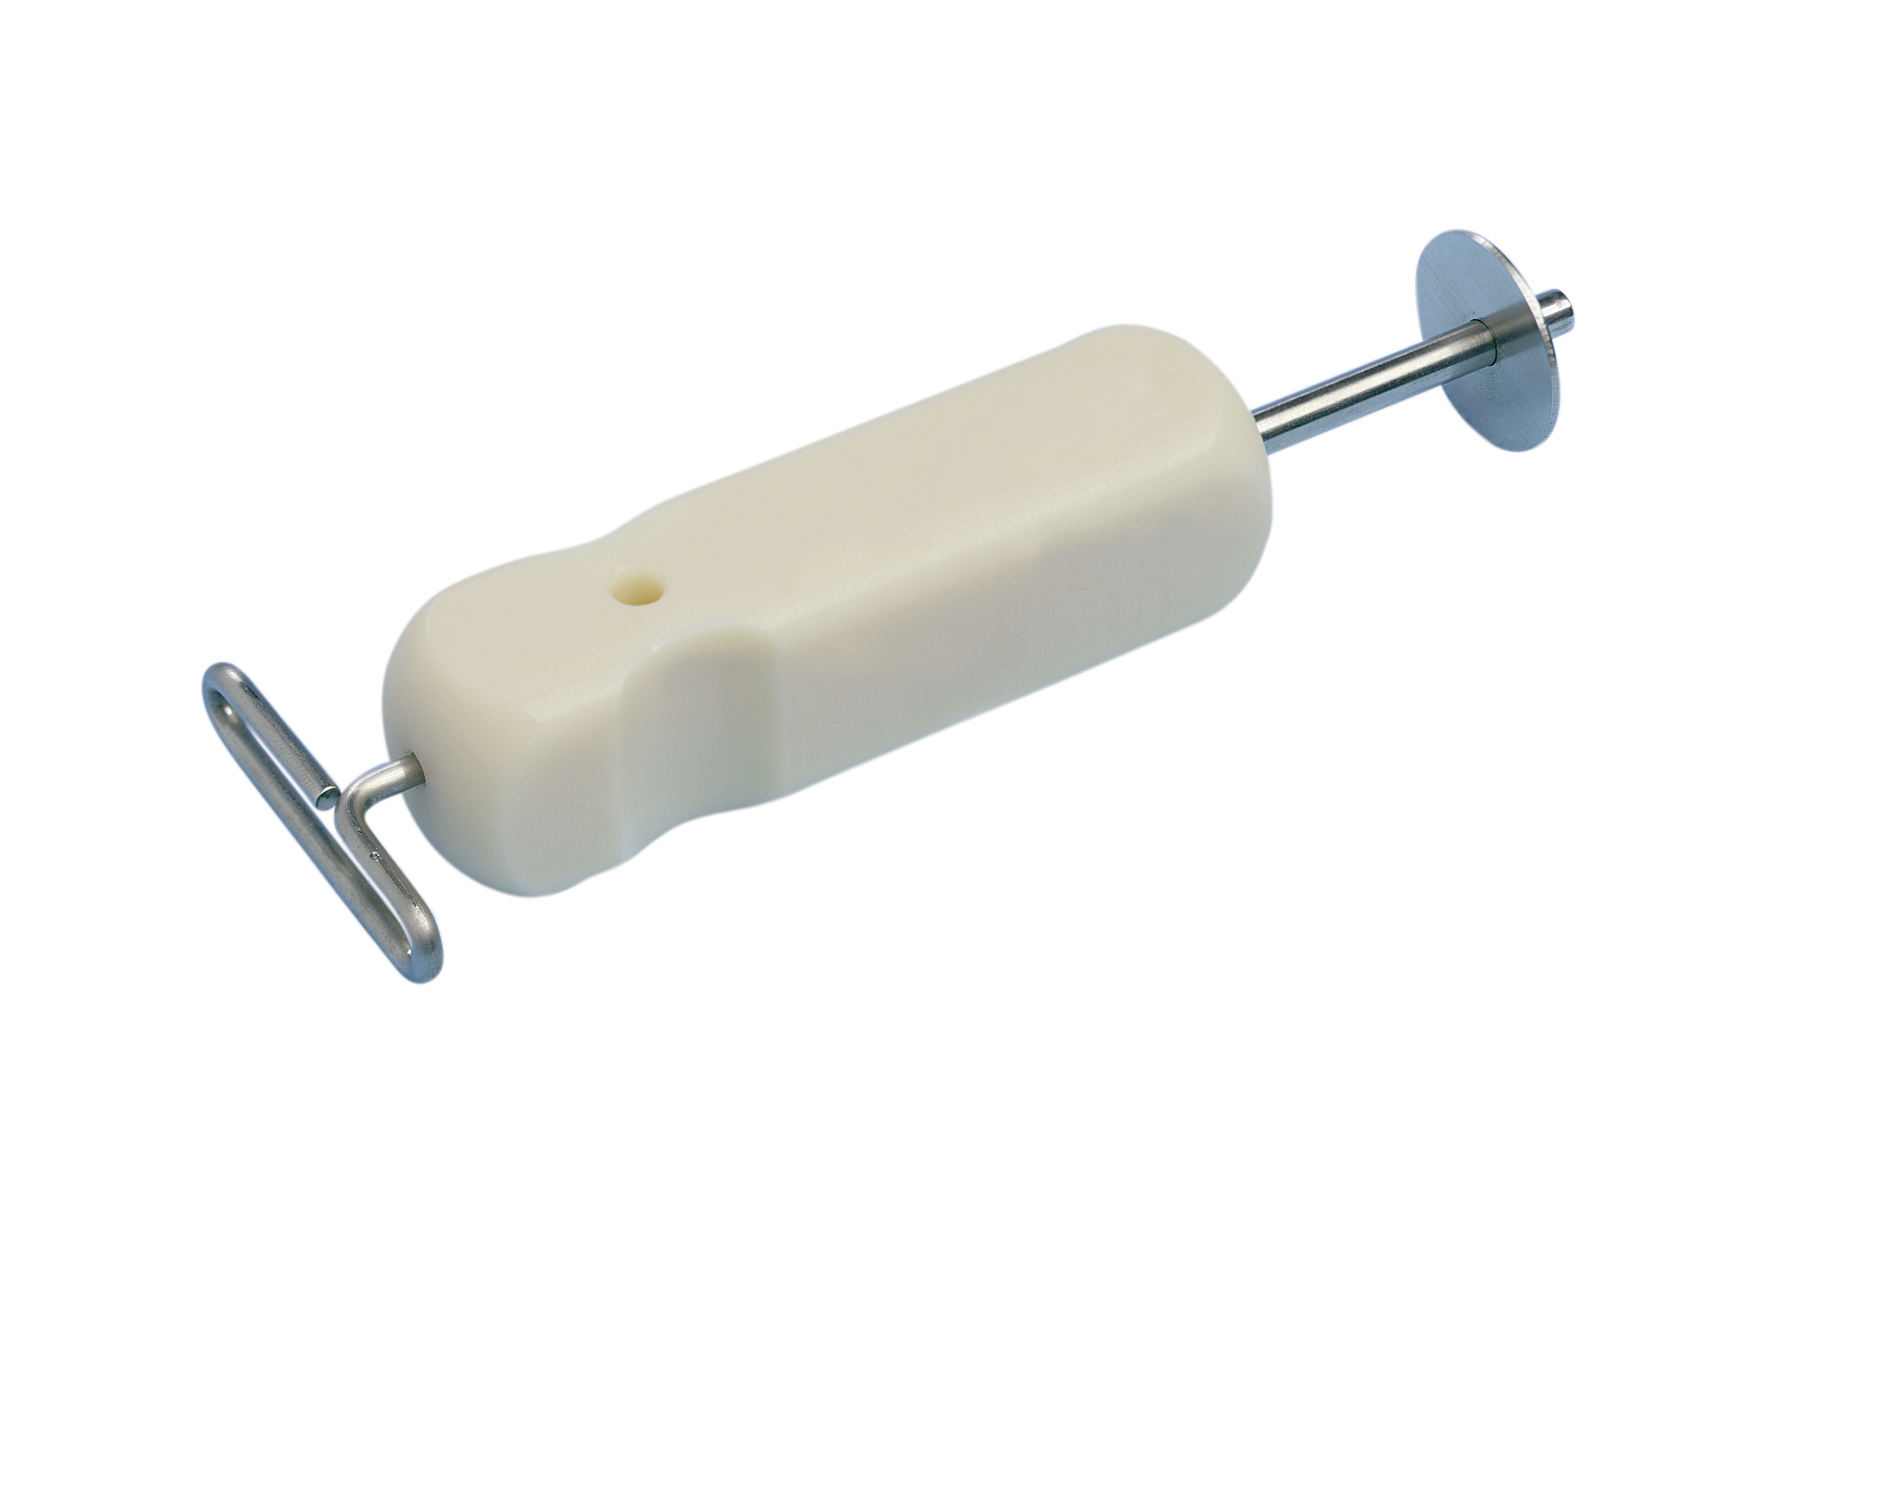 Trocar w/cannula, for inserting toggle suture